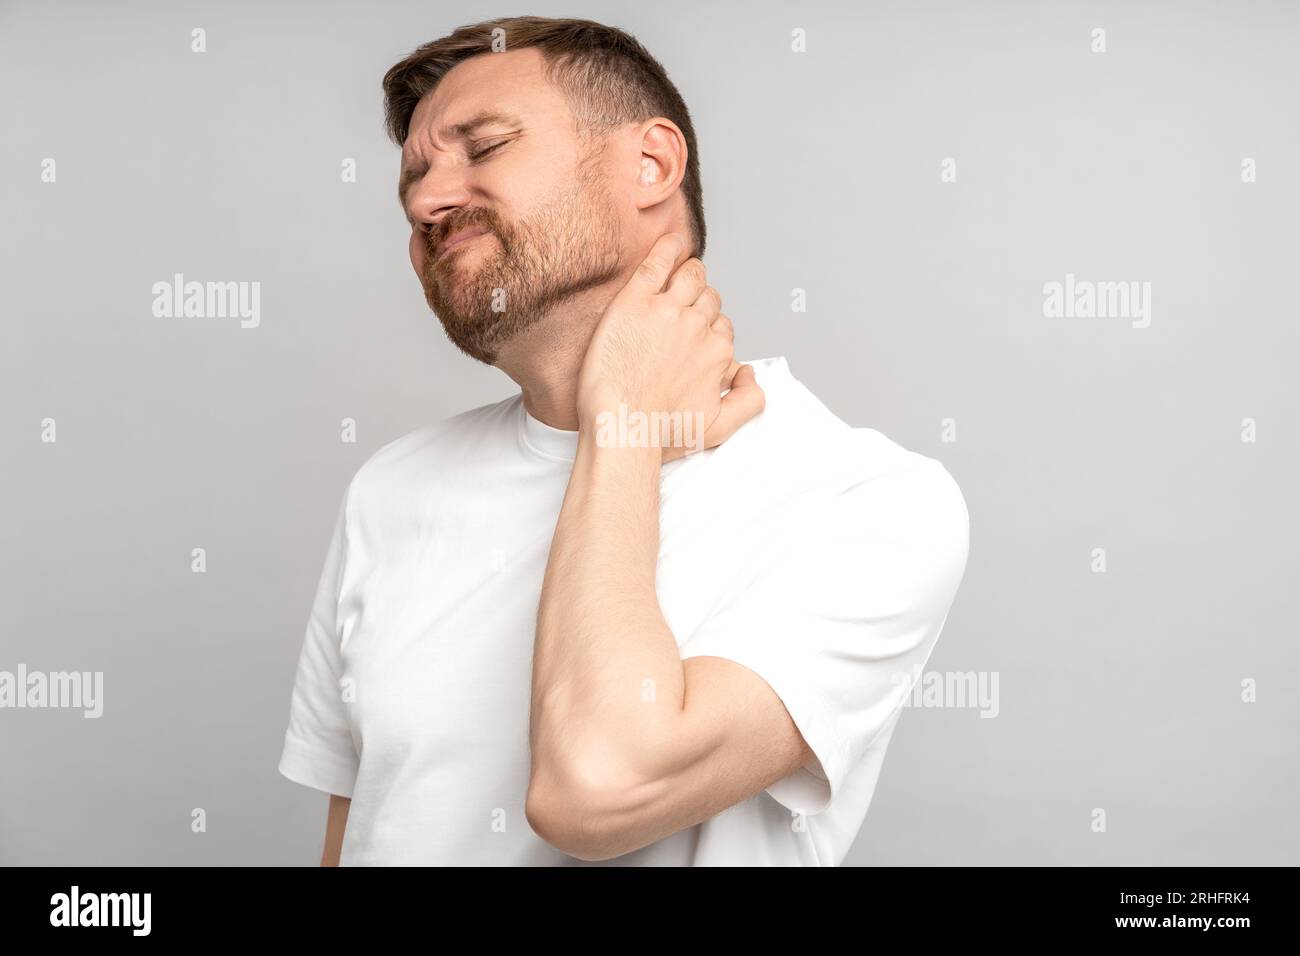 Man suffers from neck pain isolated on studio gray background. Neck ache, hernia concept Stock Photo